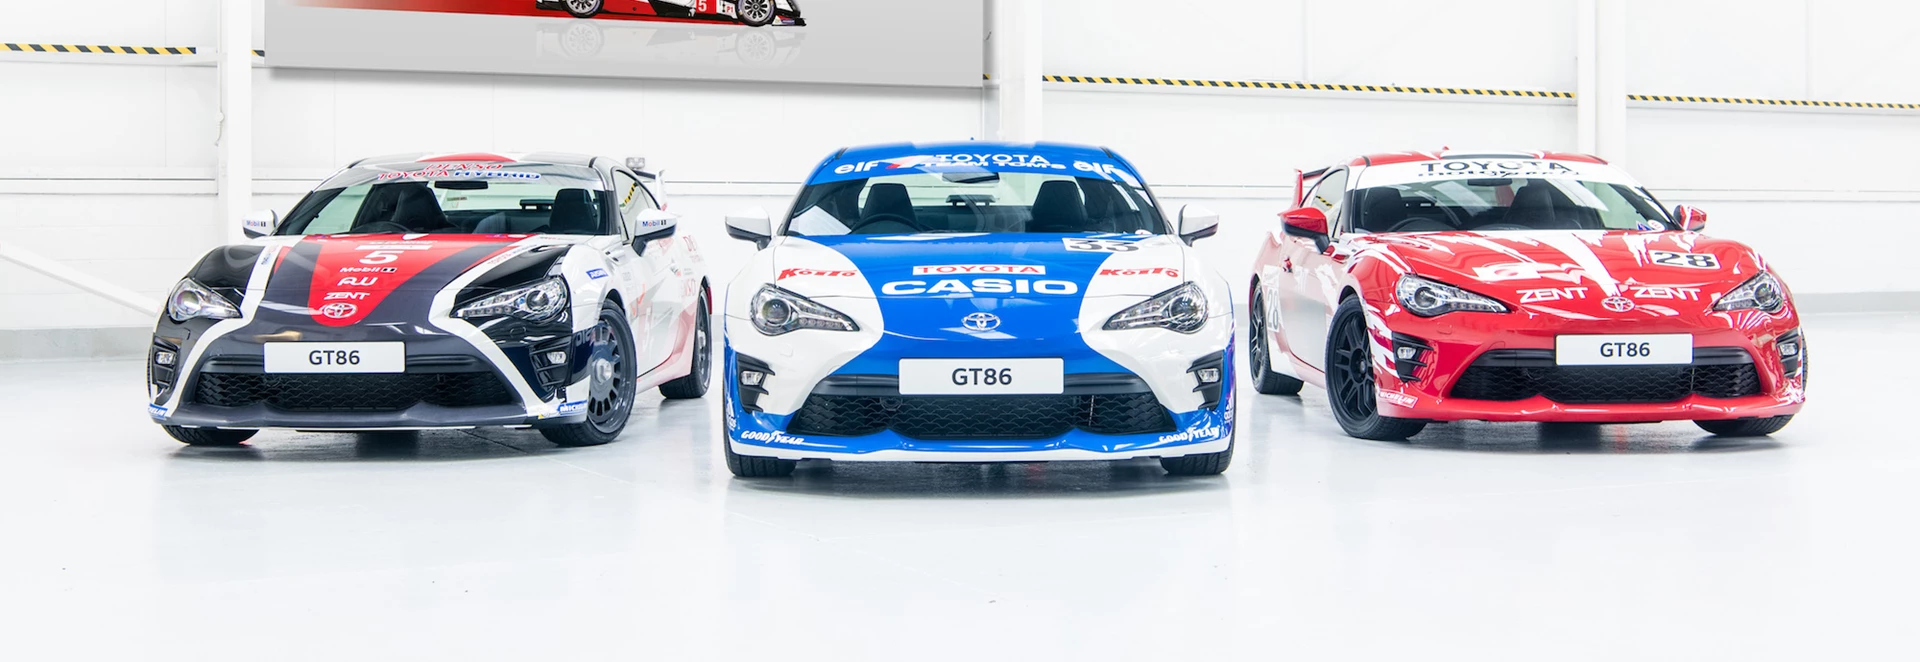 Toyota reveals Le Mans-inspired GT86 trio